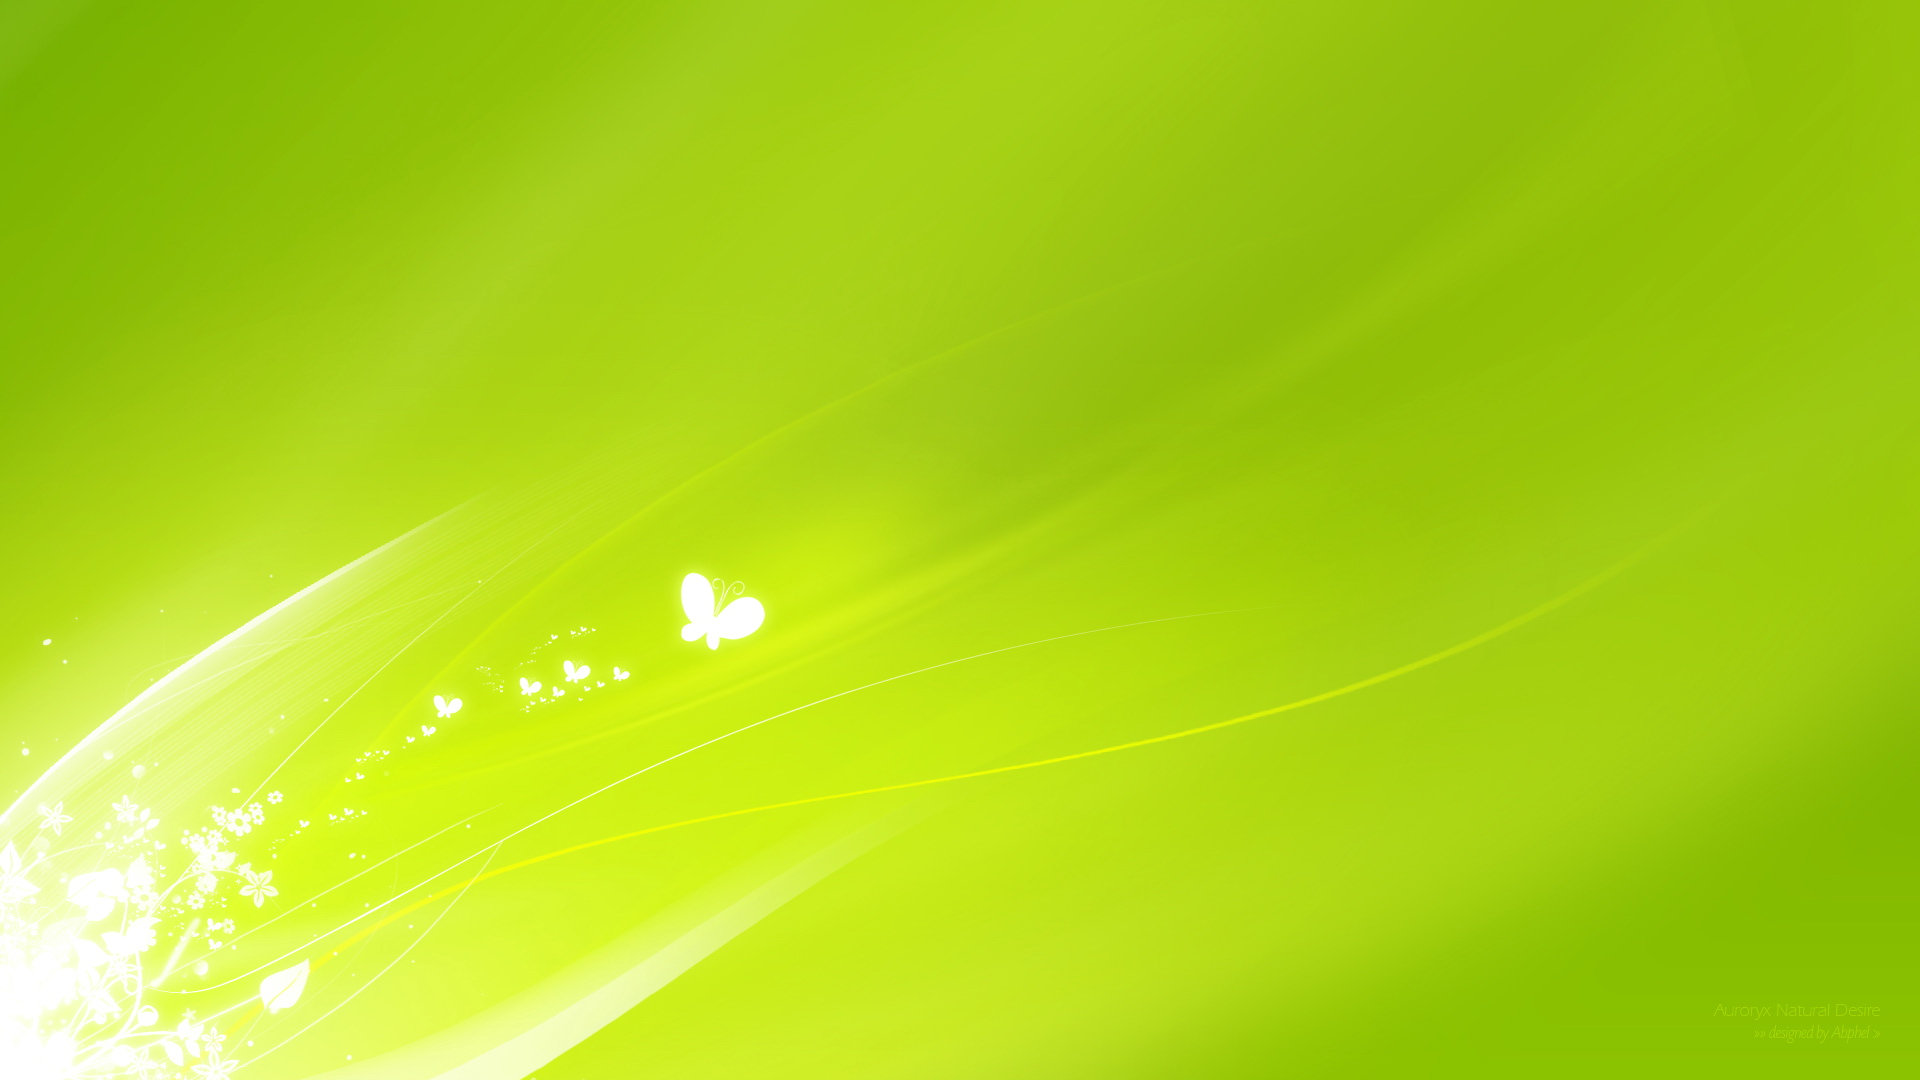 green screen background images space